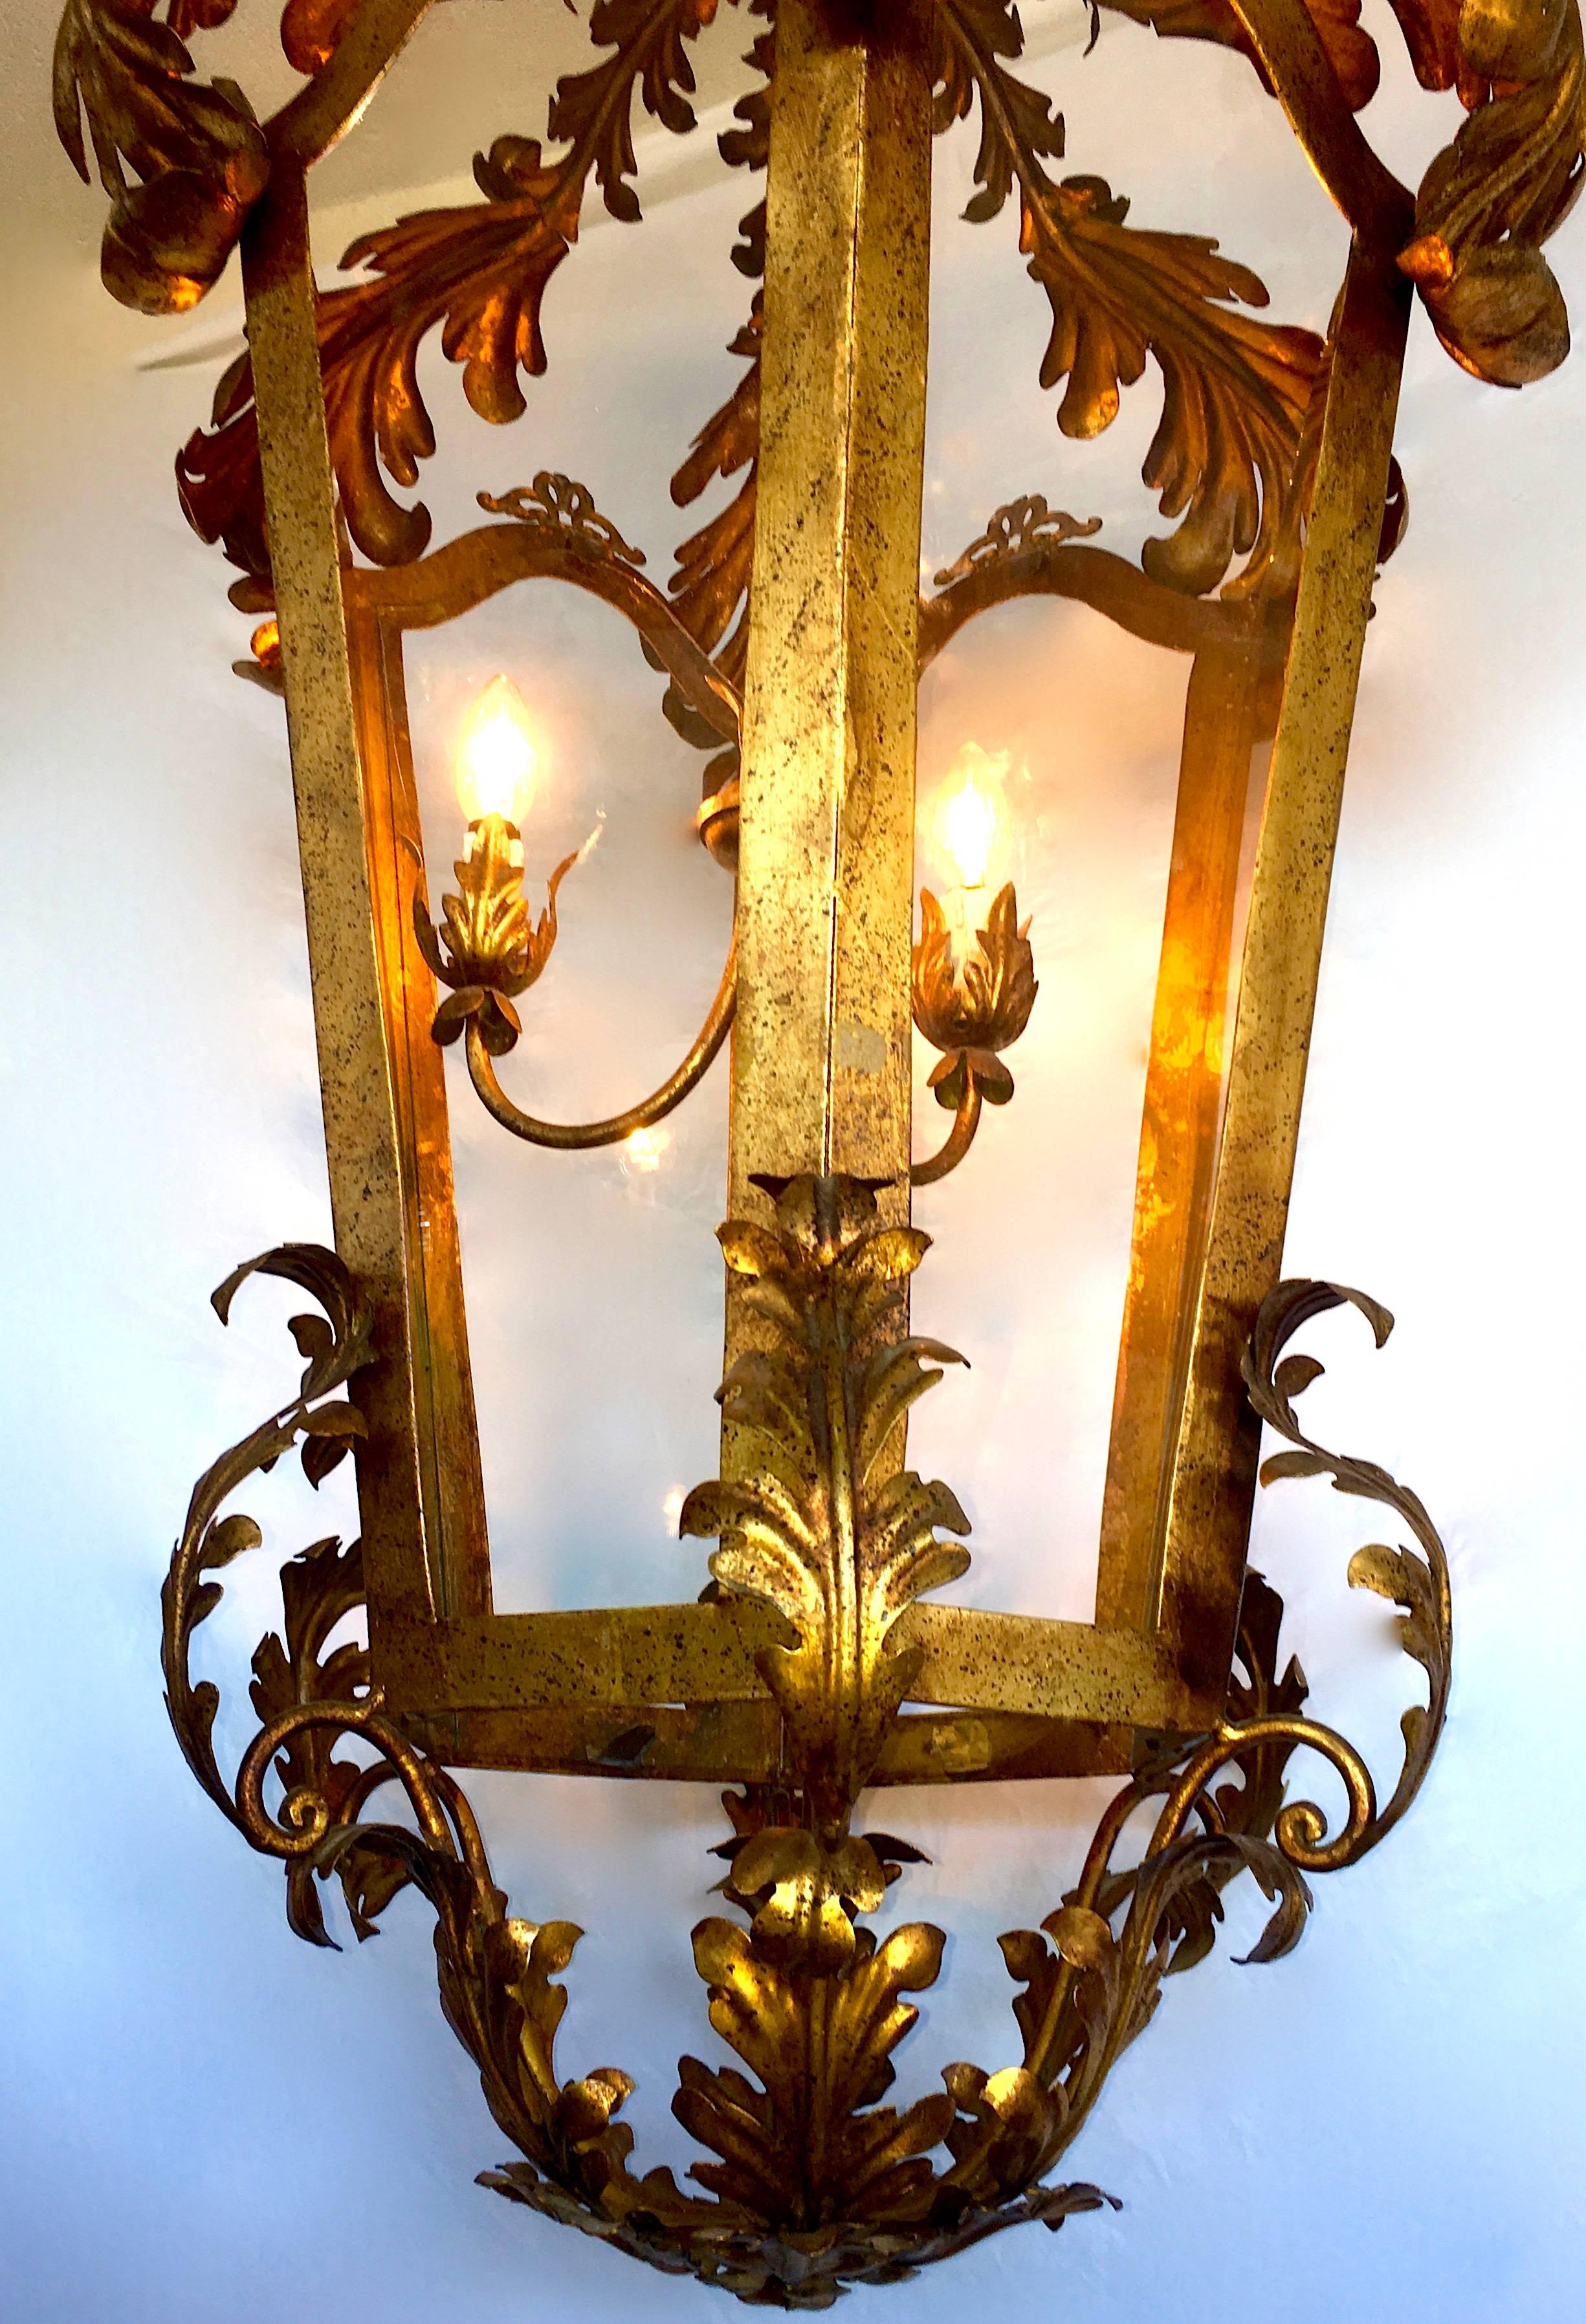 Large glass lanterns with applied leaves.
Three-side lantern, patinated gold metal decorated with cut metal leaves. Venetian Italian work dating from the beginning of 20 century. Measure: 140 cm height.
A real stunning ORIGINAL vintage period lamp